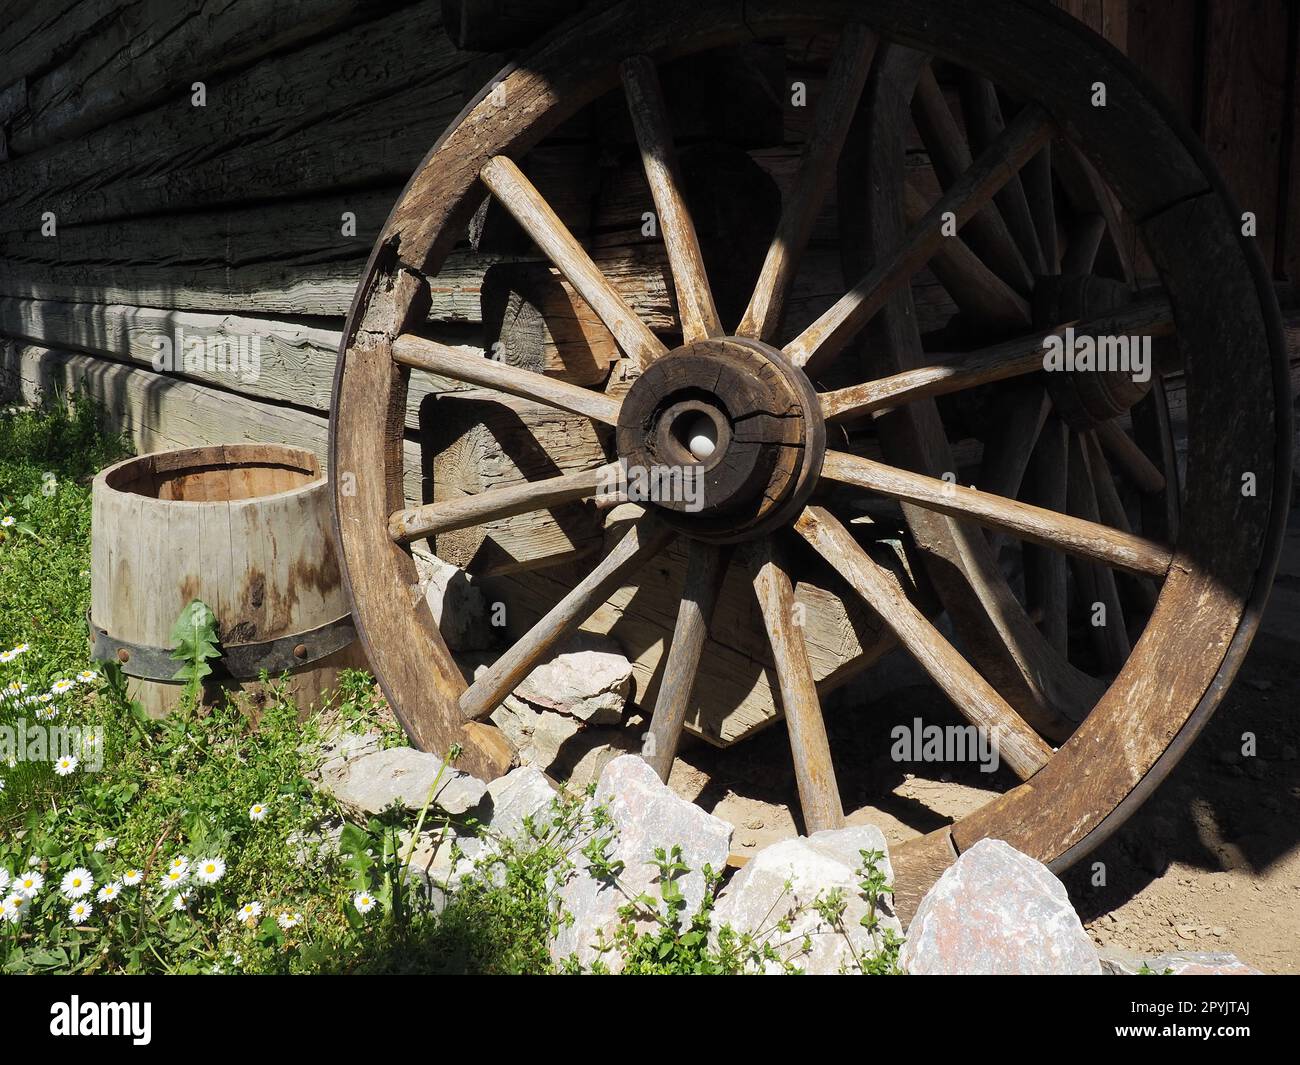 Wooden wheel from a cart. Decorative wheels for decorating lawns, exteriors and rustic interiors. Round homemade wheel against the wall. Retro or vintage style. Life in the countryside Stock Photo